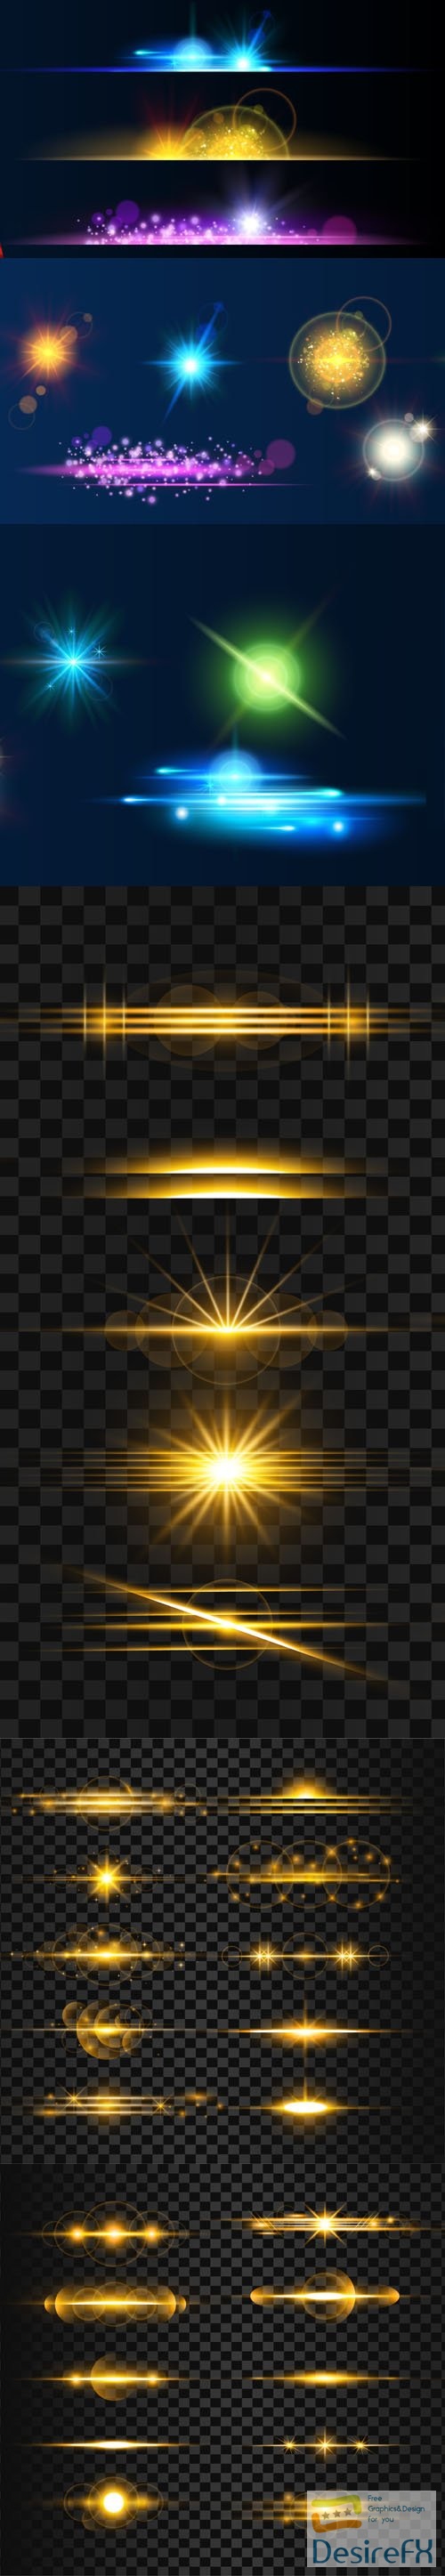 8 Realistic Light Effects Vector Templates